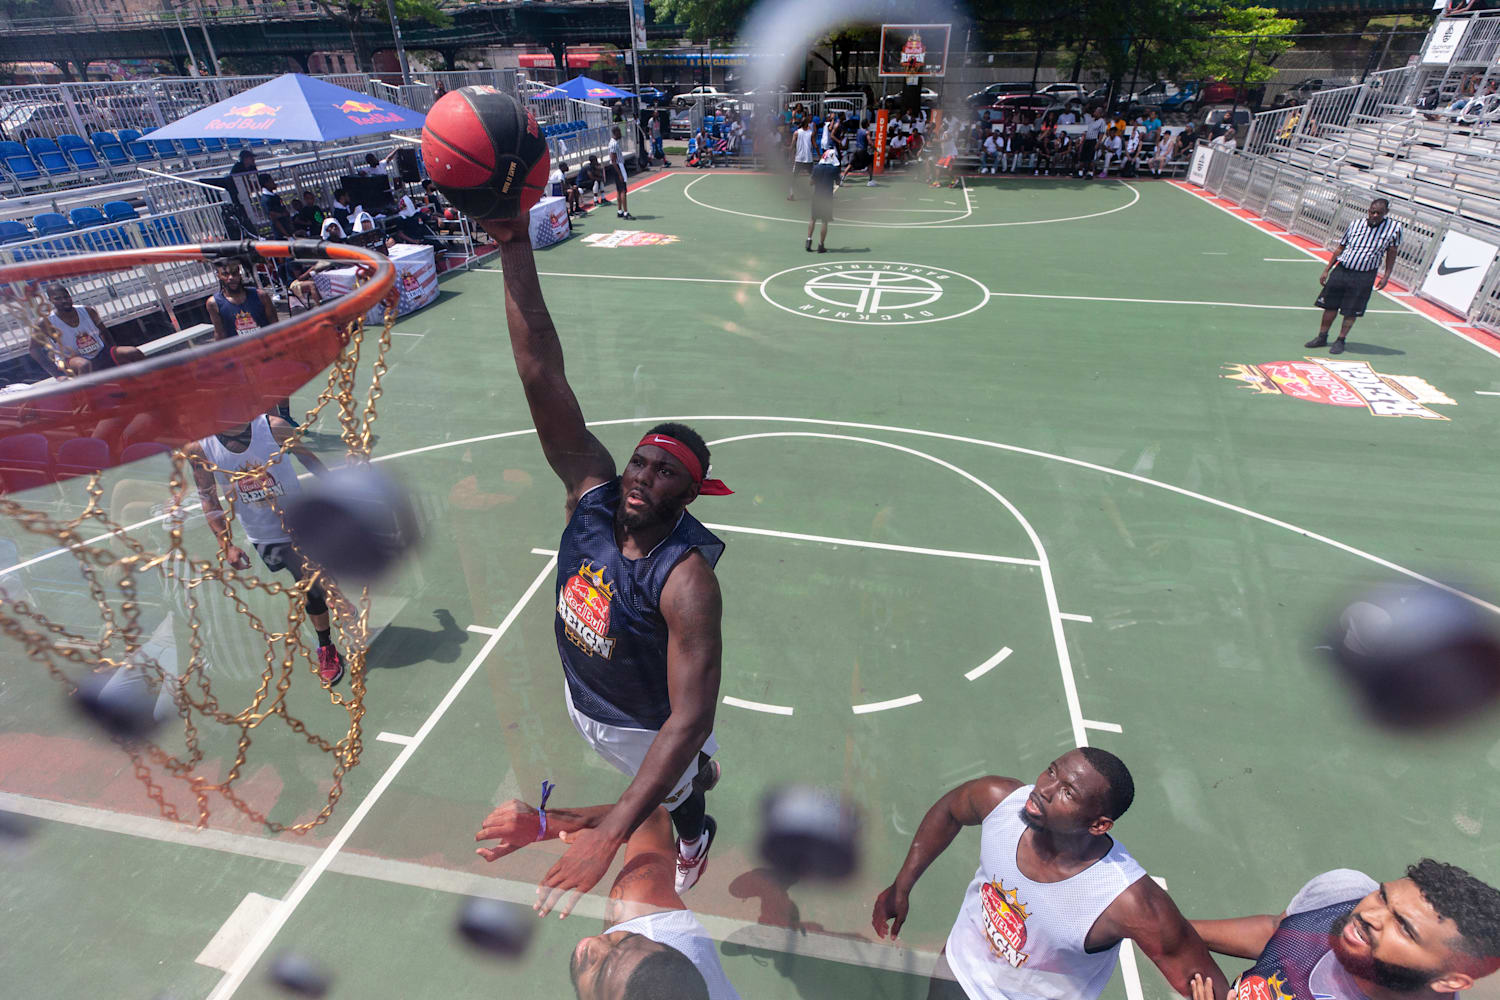 10 famous streetball courts in the U.S.